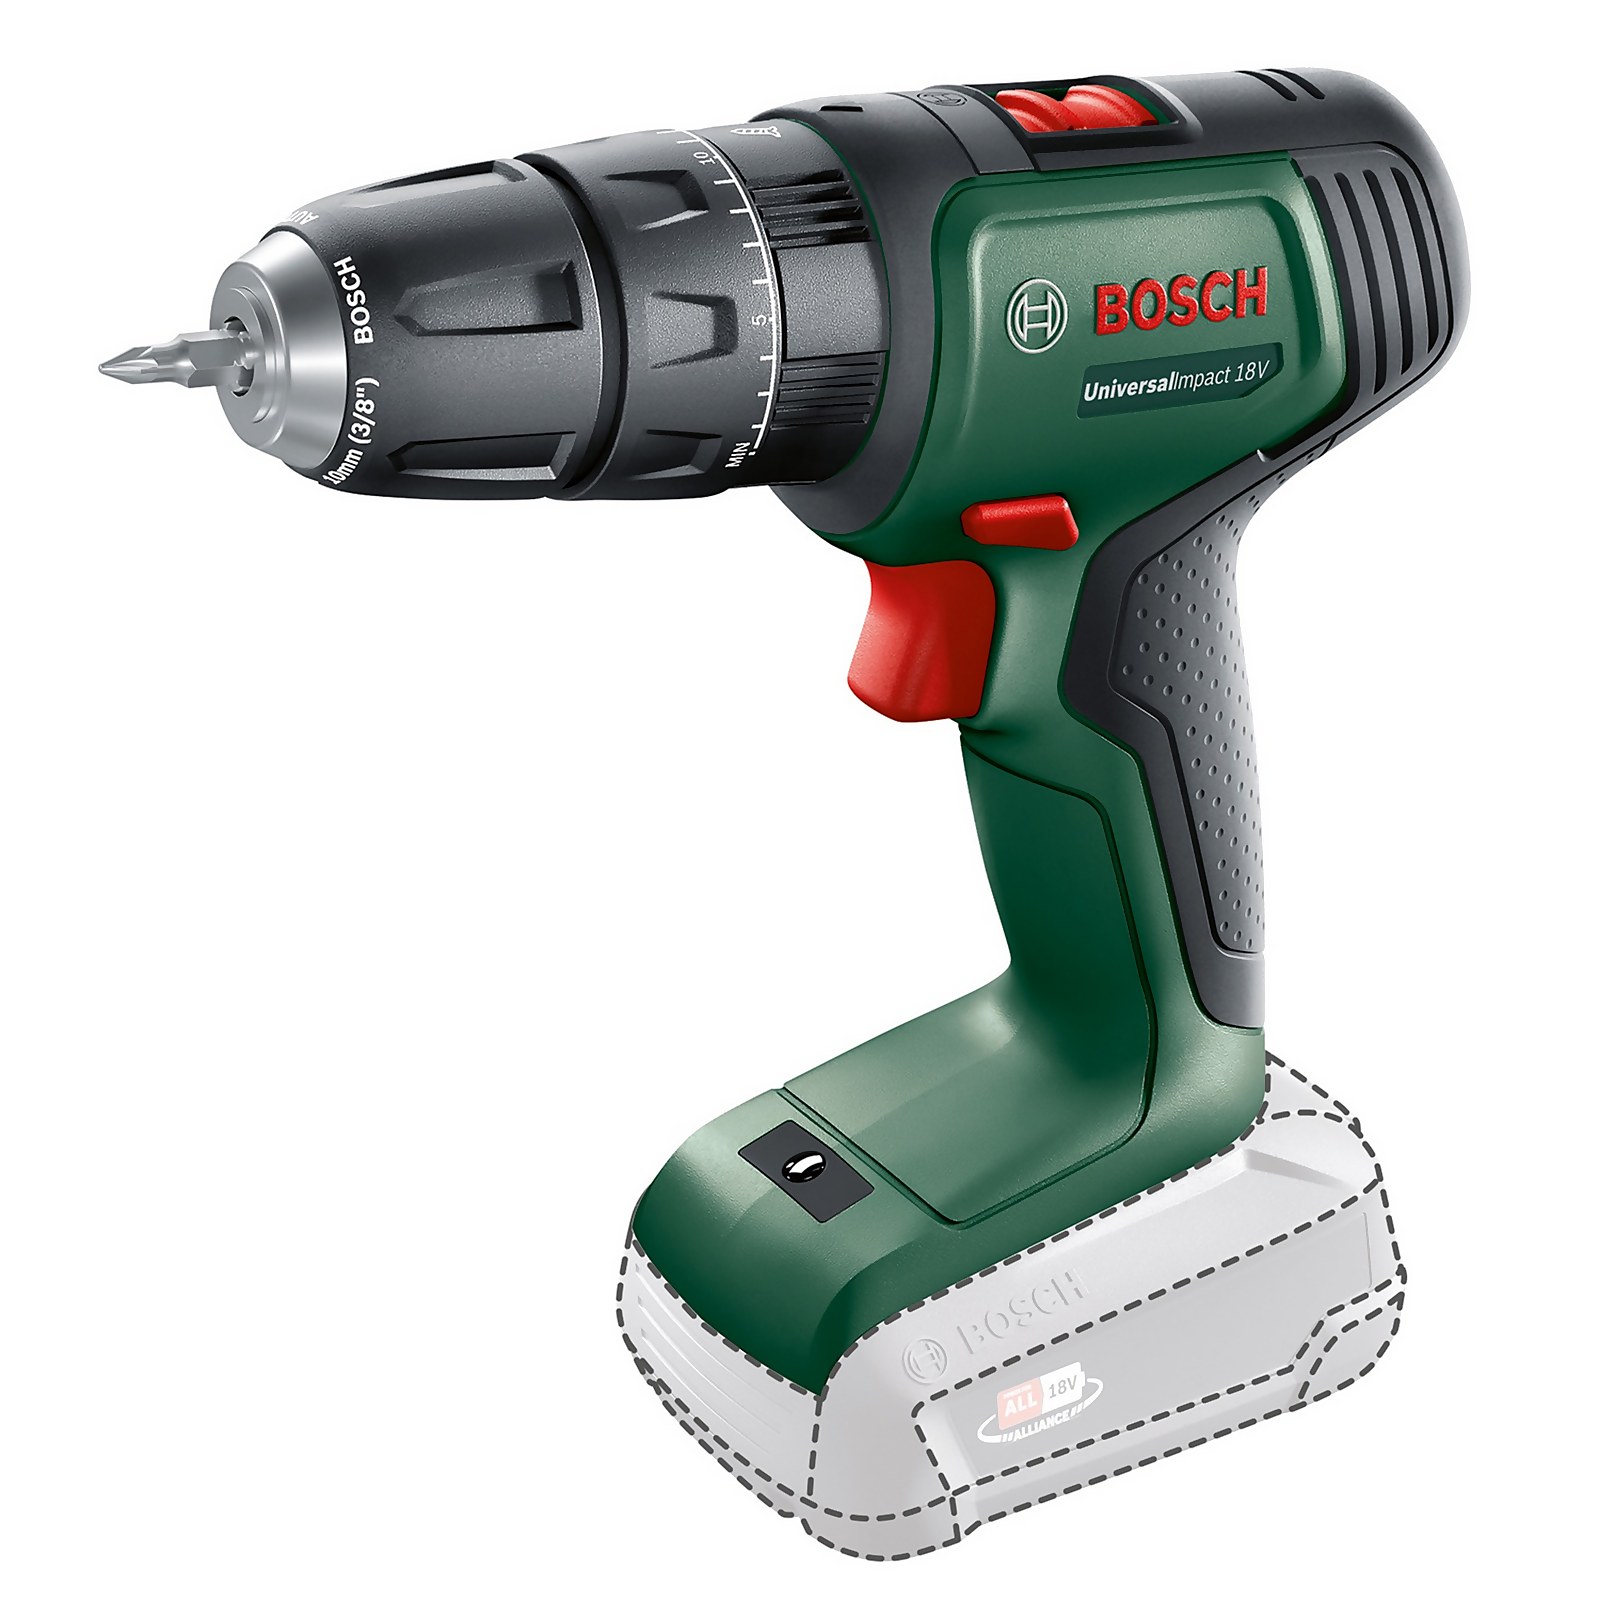 Photo of Bosch Universalimpact 18v -no Battery Included-